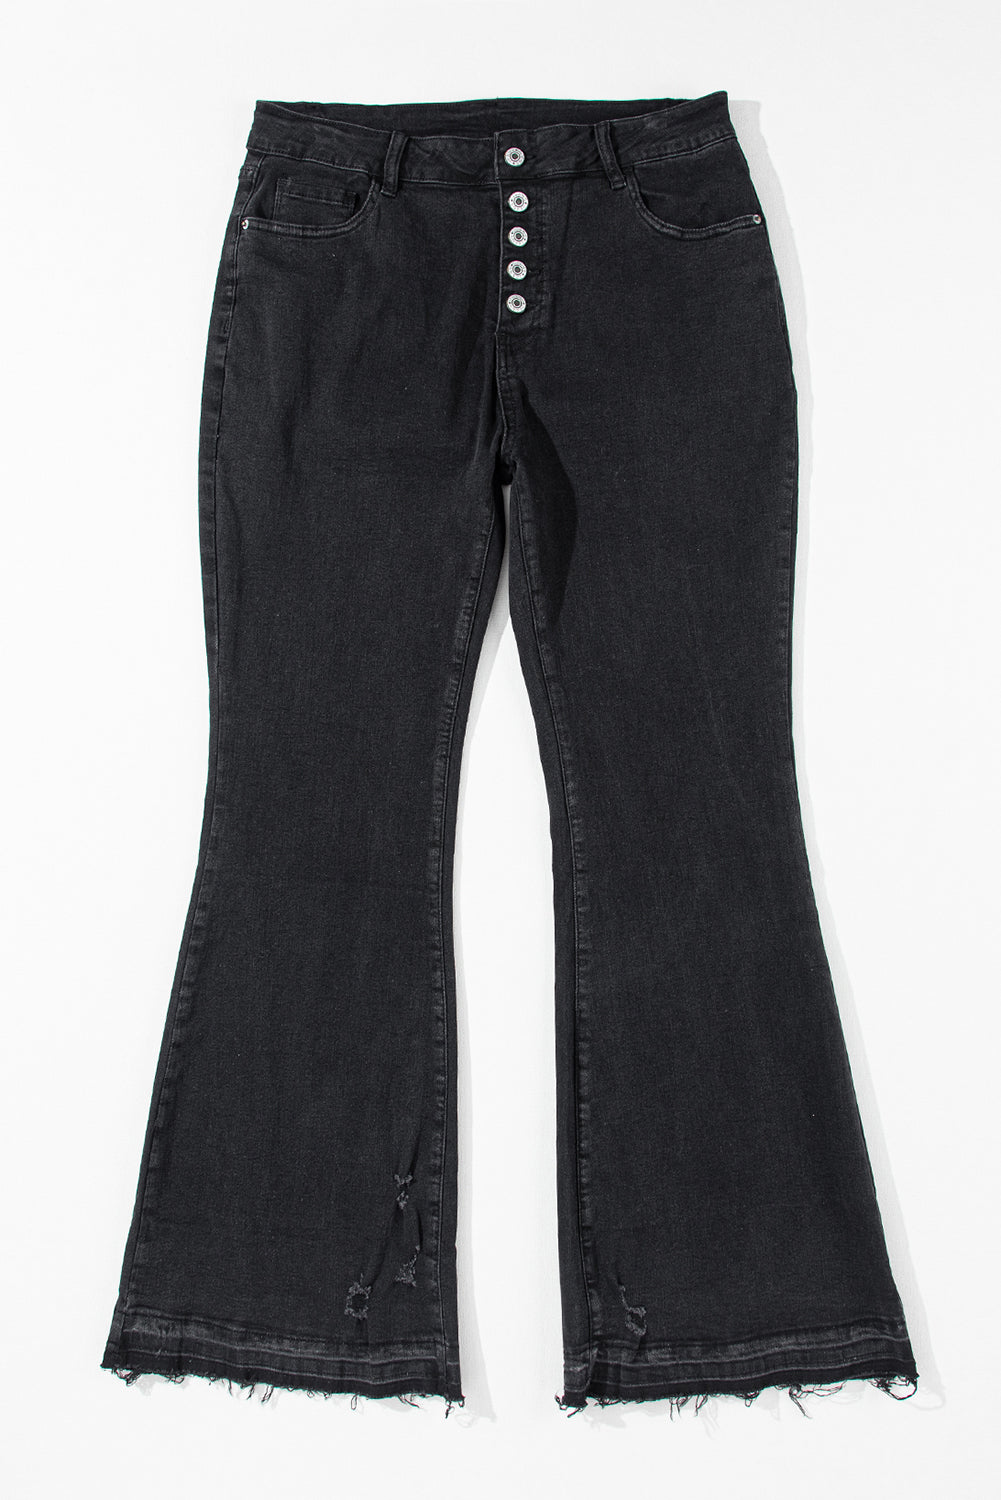 Black High Waist Button Front Flare Jeans - SELFTRITSS